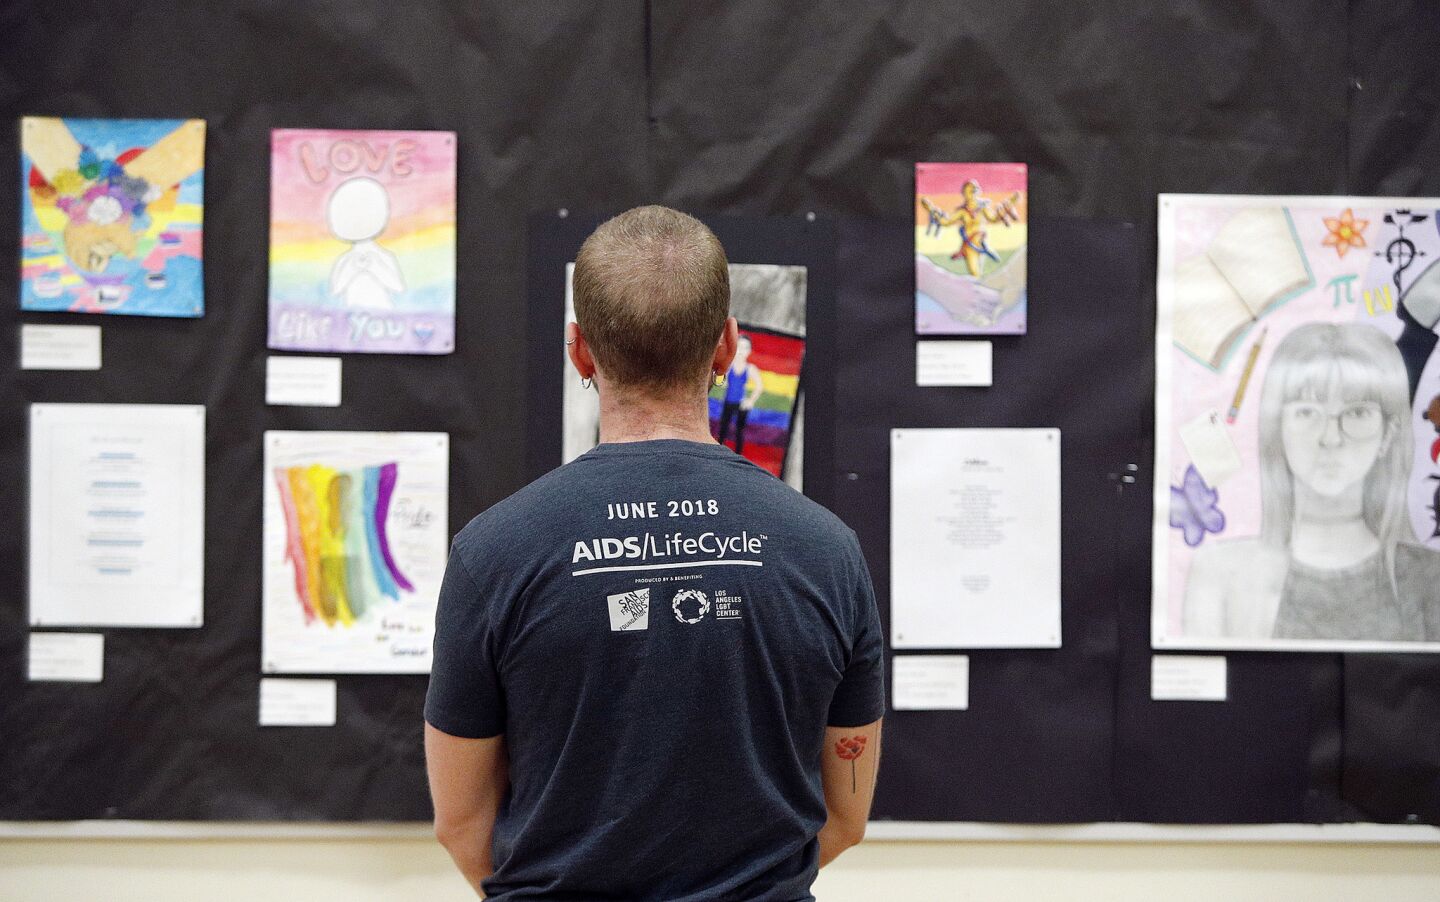 Ben Evans, Programs and Gallery Director for ACE/121 Gallery Art Gallery in Glendale at the opening night of the PRIDE art show at Crescenta Valley High School on Monday, May 13, 2019. There are 45 art submissions from throughout the Glendale Unified School District, including elementary, middle, and high school pieces. The best of which will be showcased in the city of Glendale's PRIDE 2019 art show at the Ace 121 Art Gallery.